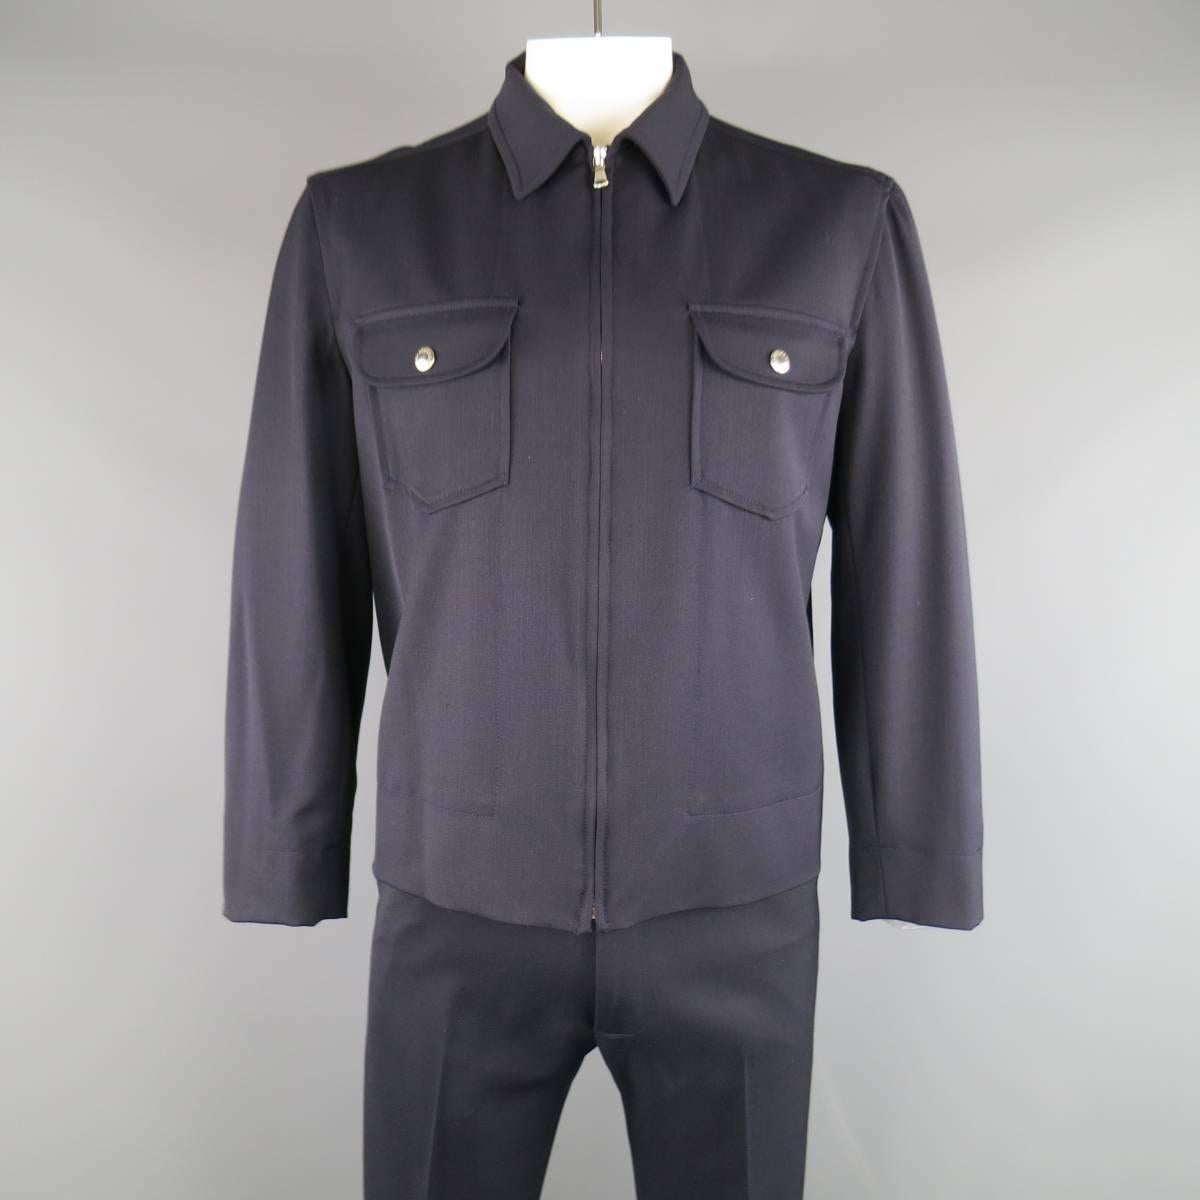 DOLCE & GABBANA two piece workwear inspired outfit comes in a navy blue wool blend twill and includes a classic collared jacket with snap patch pockets and back tabs with matching flat front pants. Made in Italy.
 
Excellent Pre-Owned